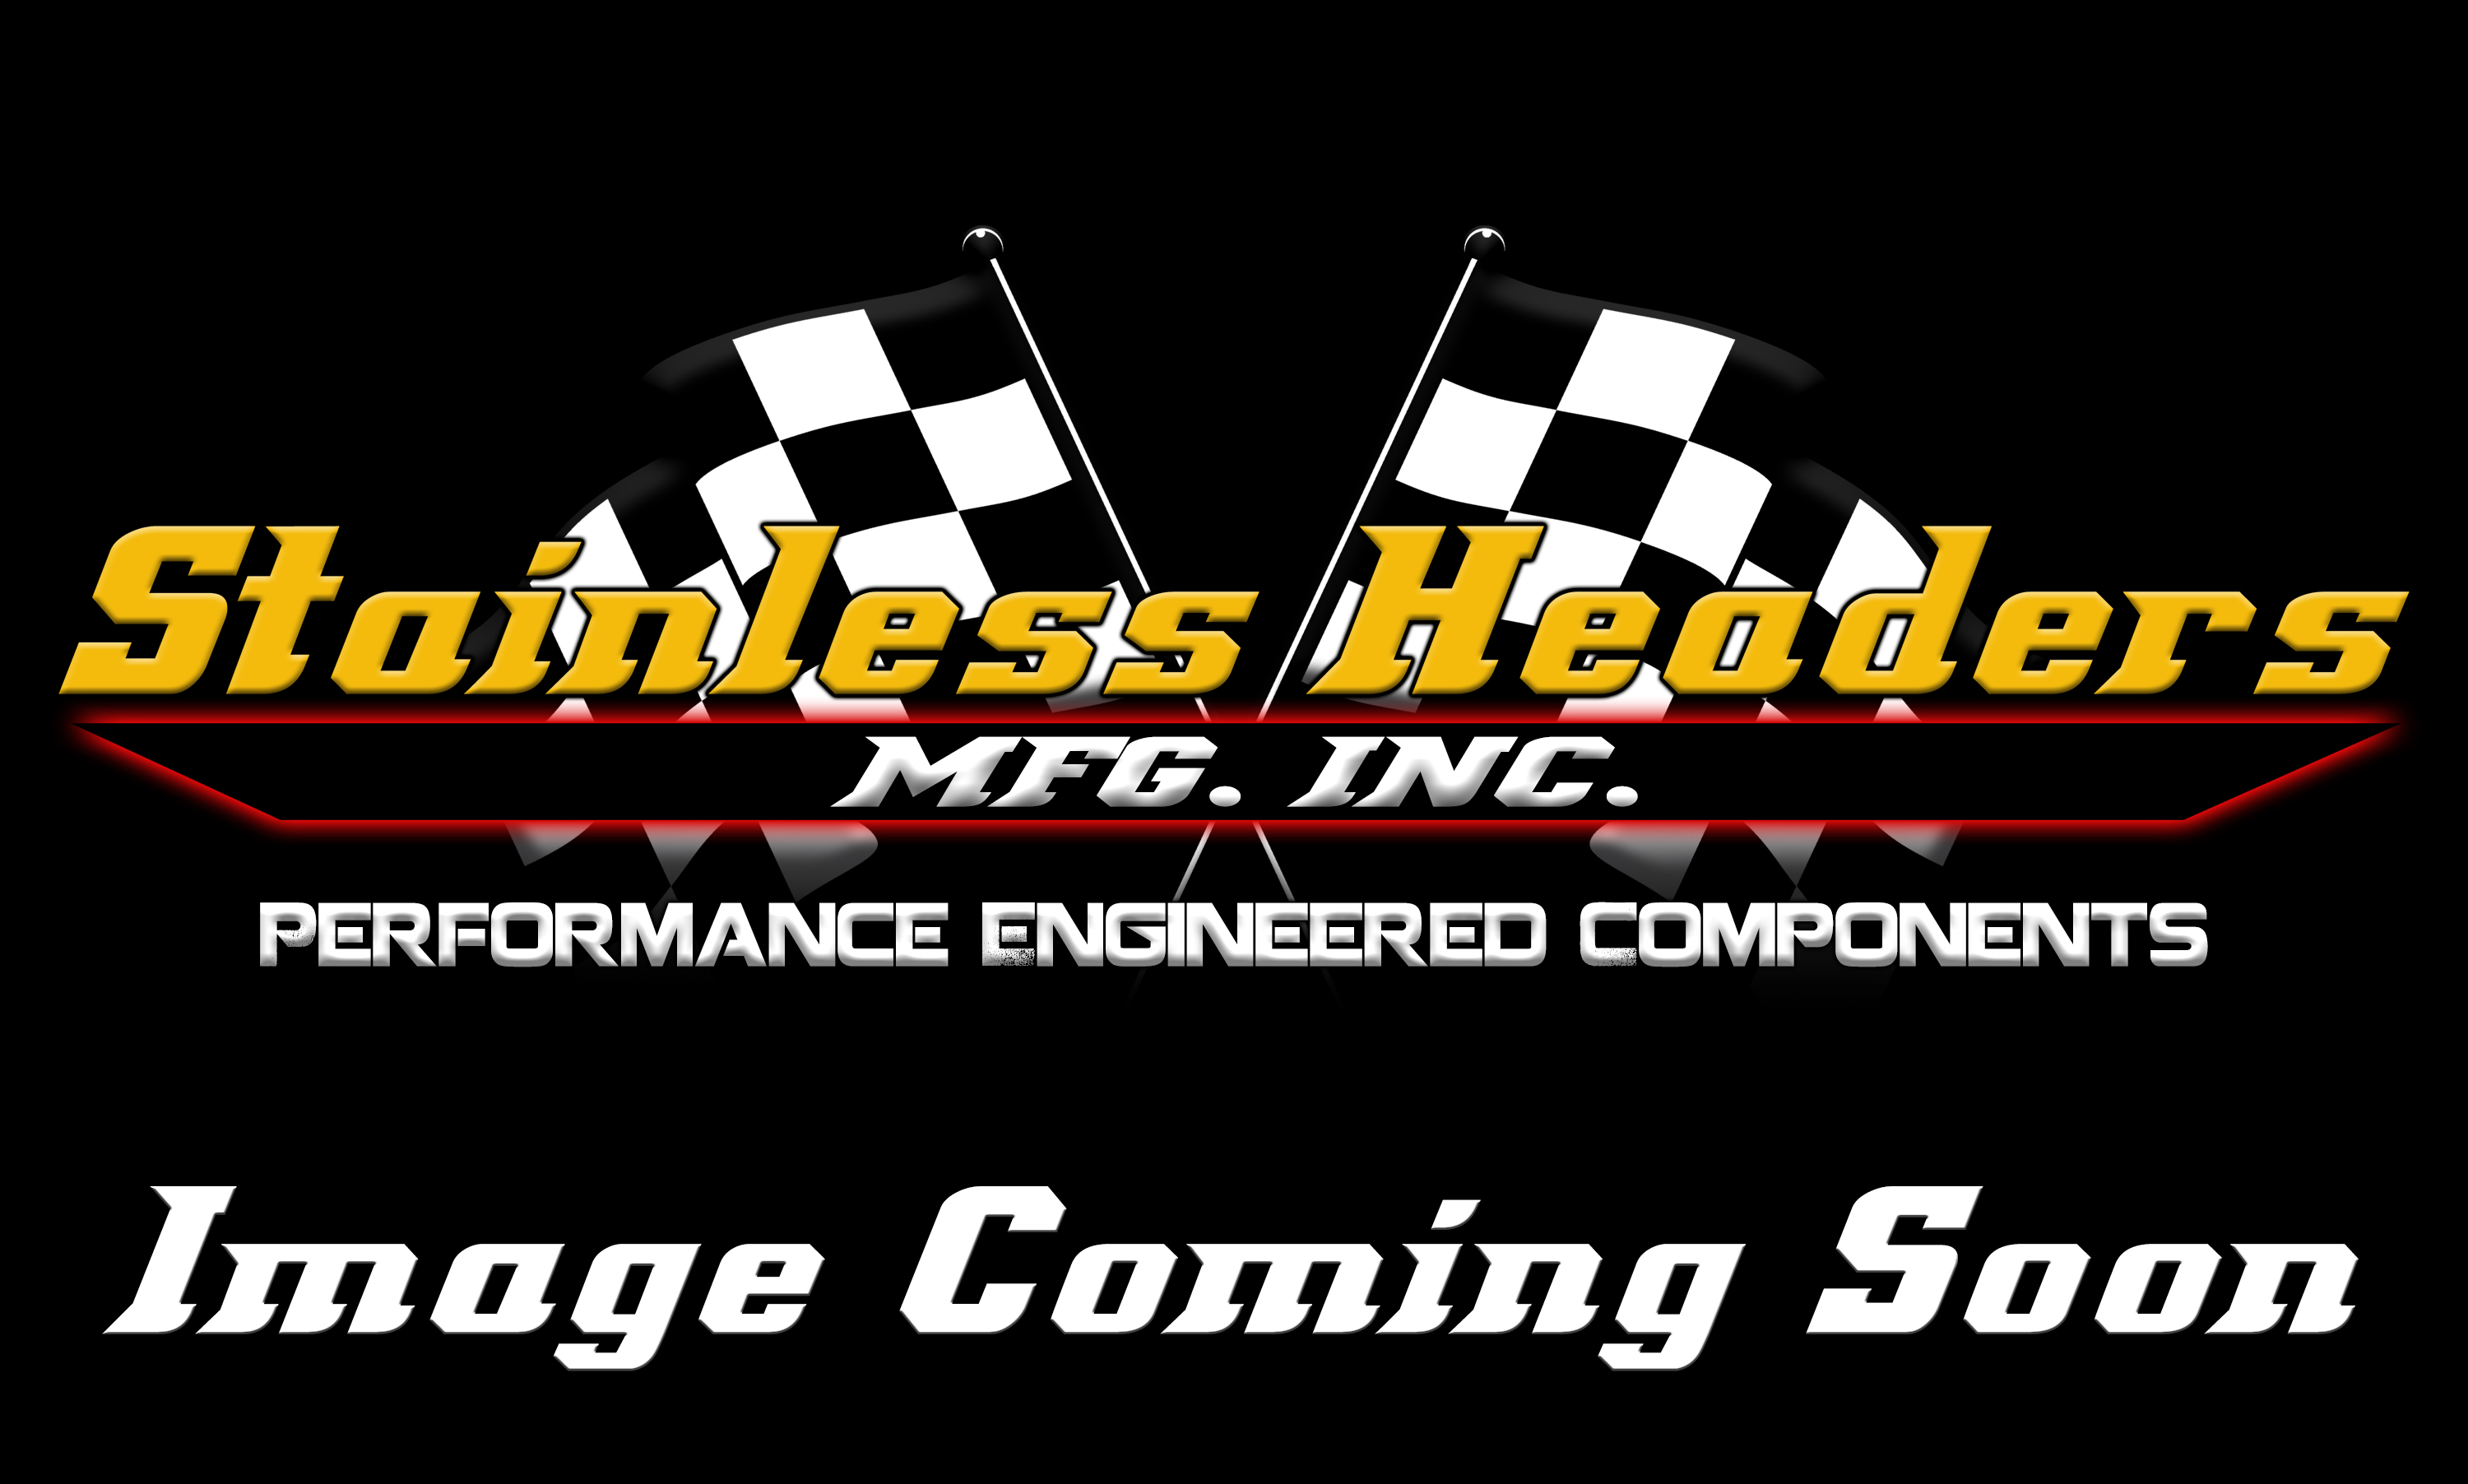 Performance Turbochargers - CompTurbo Technology Turbochargers - CompTurbo Technologies - CTR2868S-4847 Oil Lubricated 2.0 Turbocharger (575 HP)